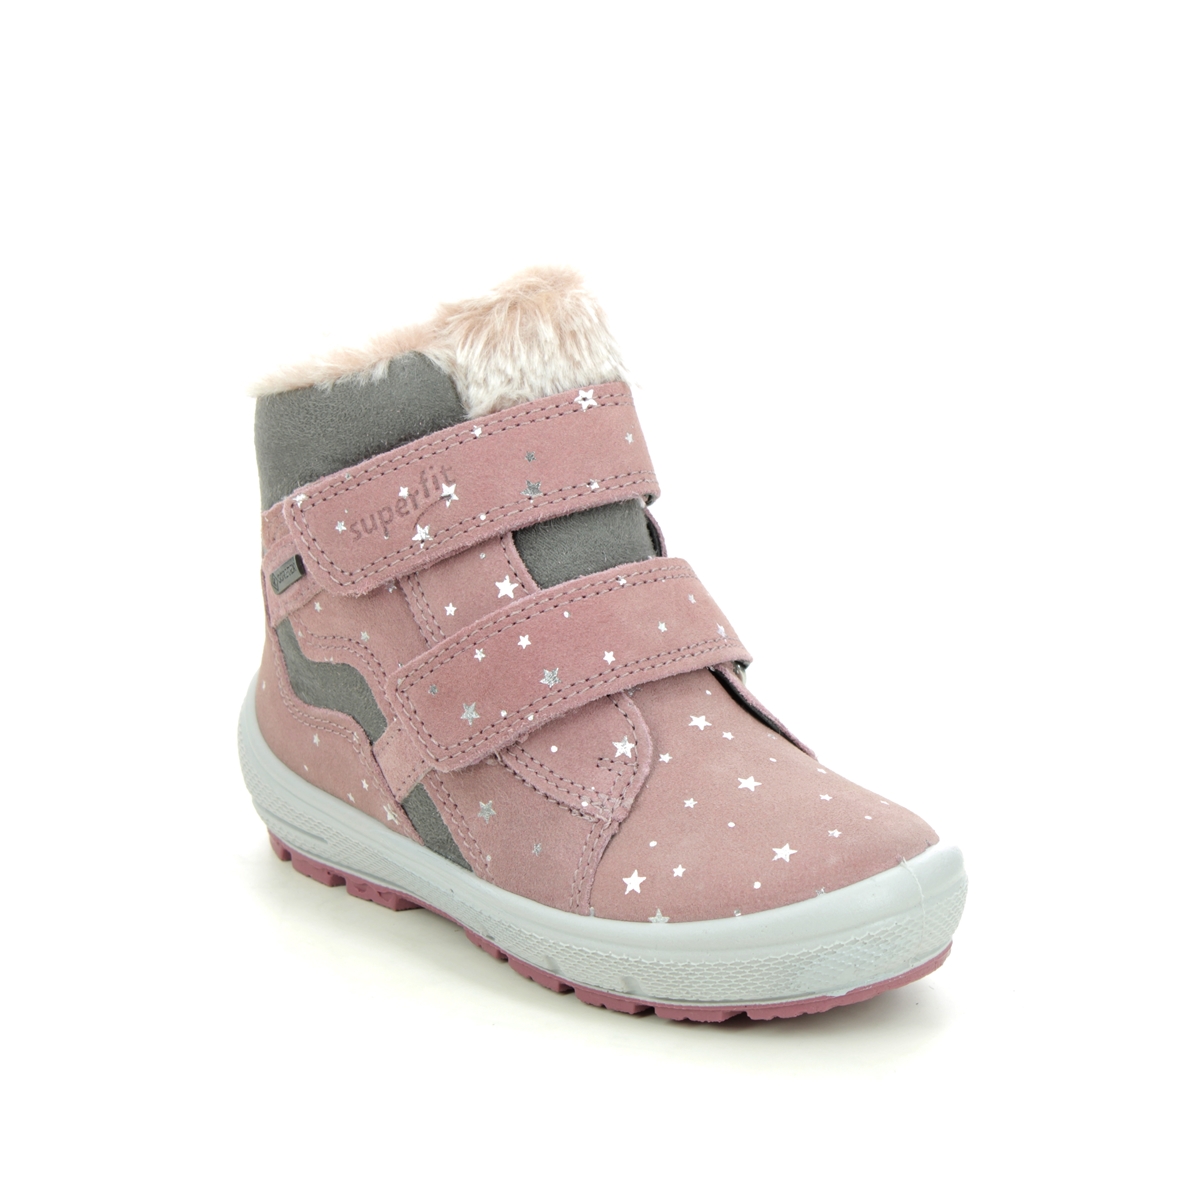 Superfit Groovy Gtx Pink Leather Kids Toddler Girls Boots 1006316-5500 In Size 26 In Plain Pink Leather